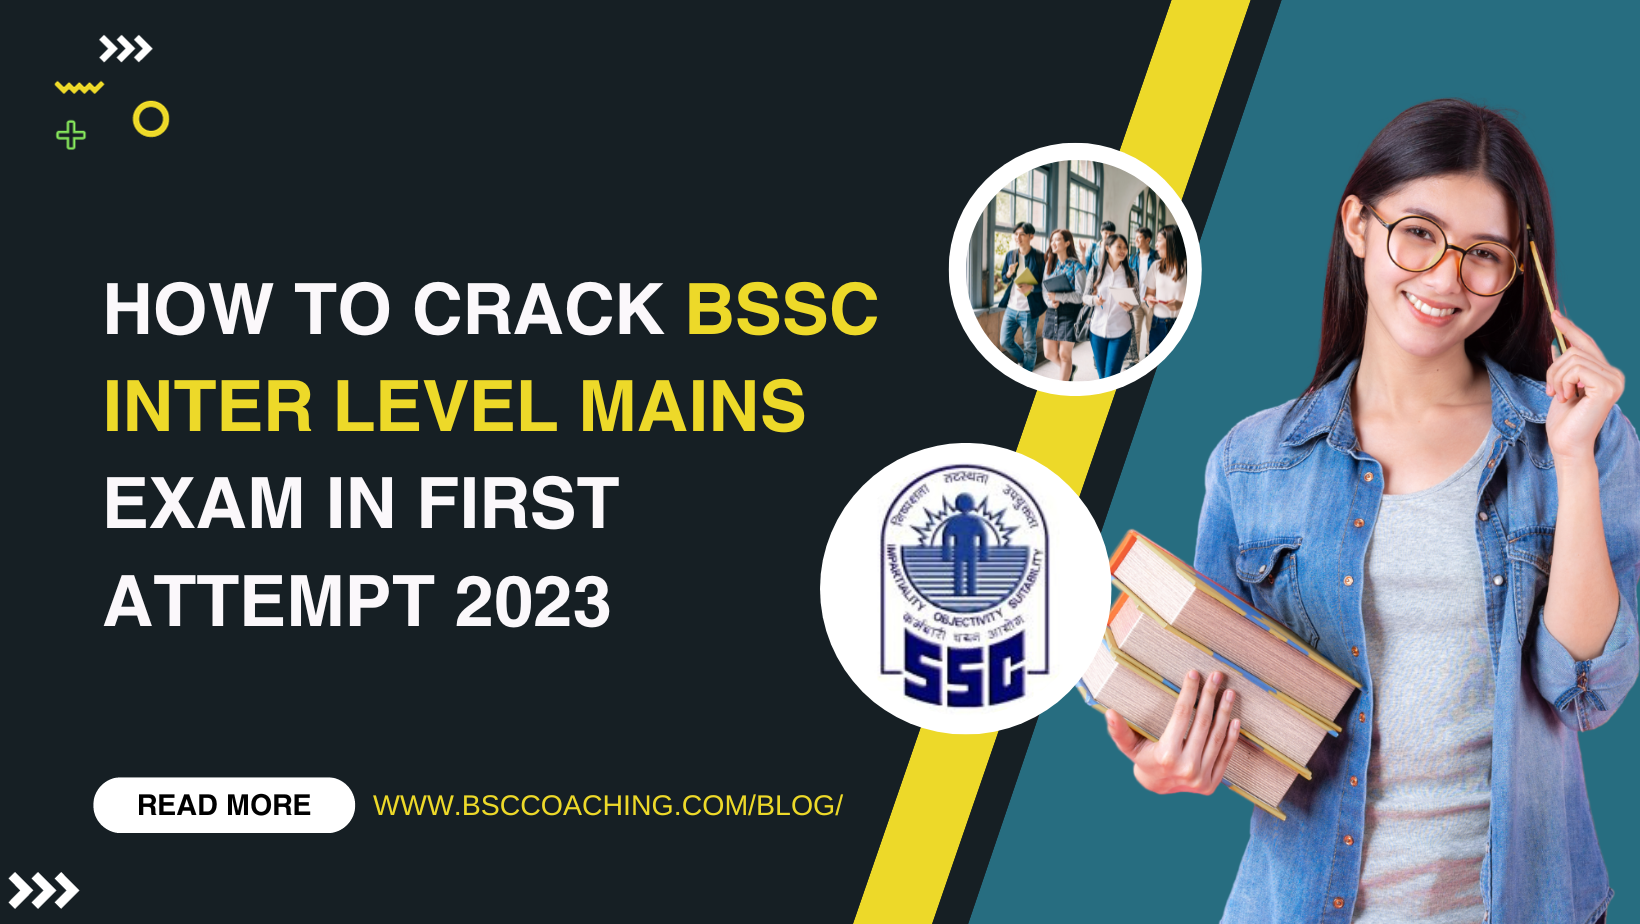 How to Crack BSSC Inter Level Mains Exam in First Attempt 2023